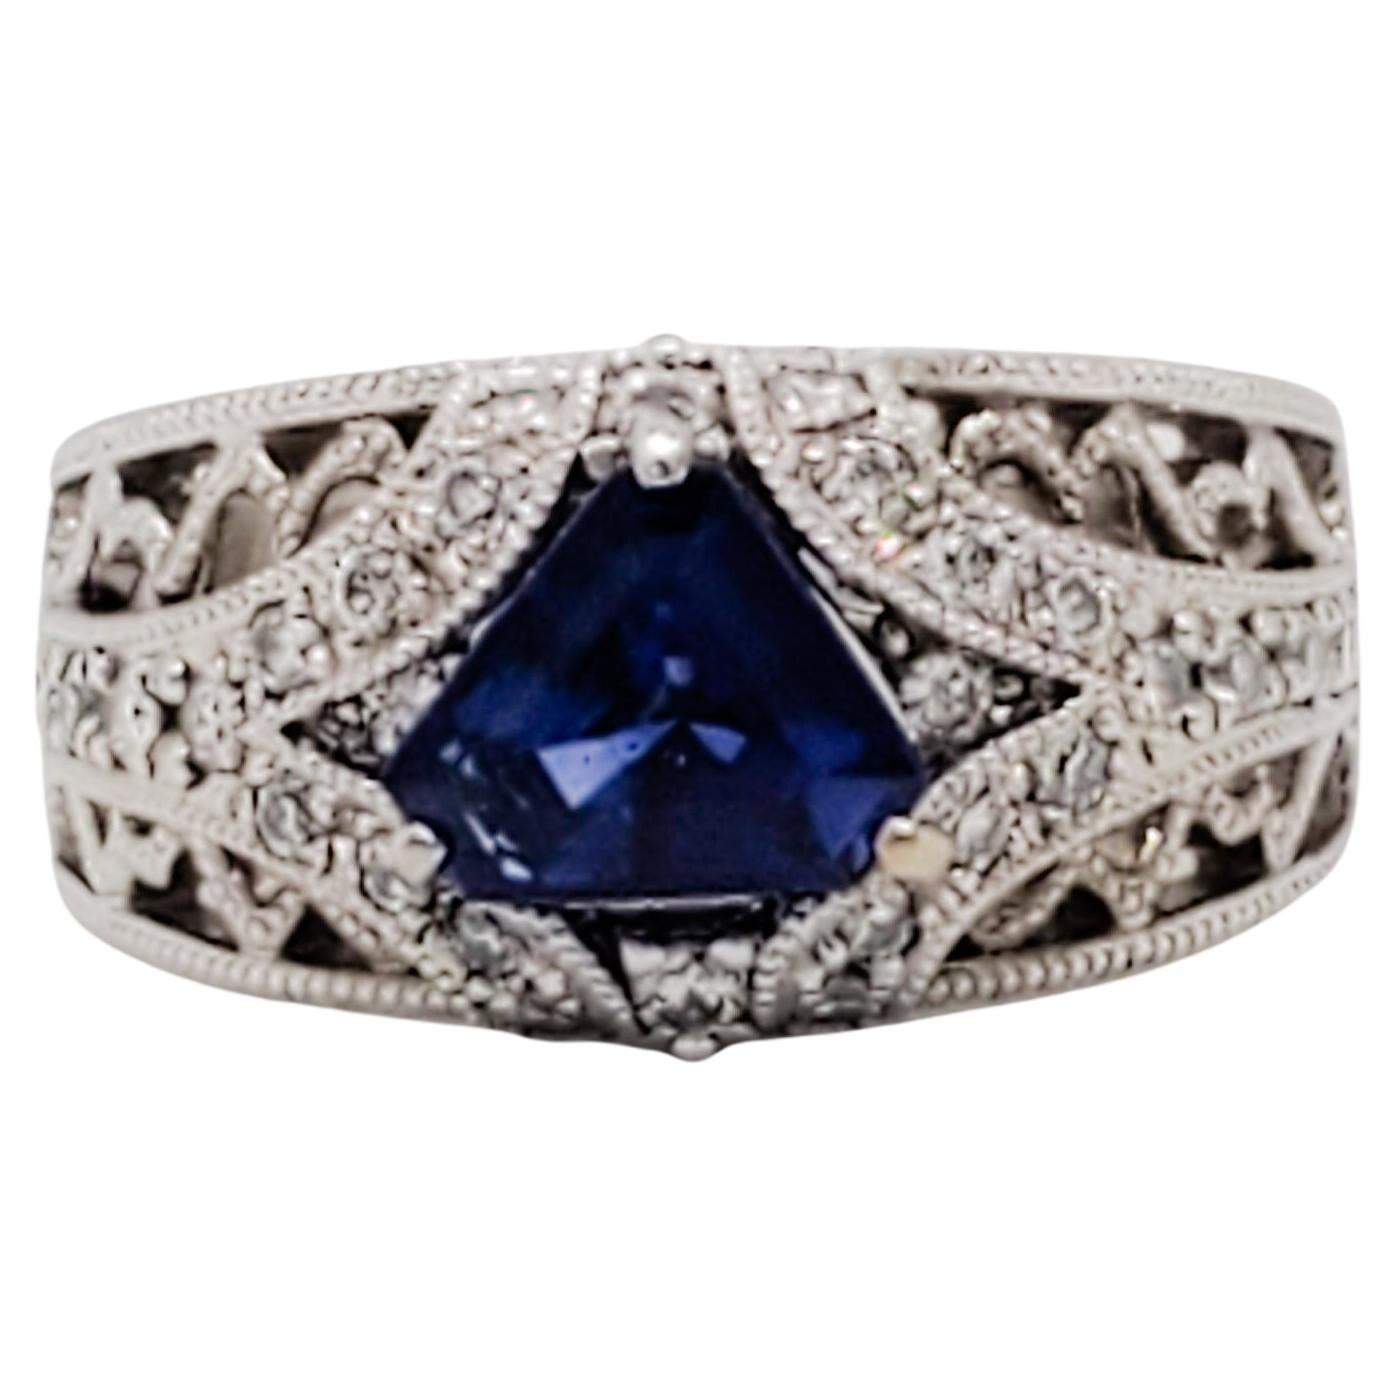 Estate Blue Sapphire and Diamond Cocktail Ring in 18k White Gold